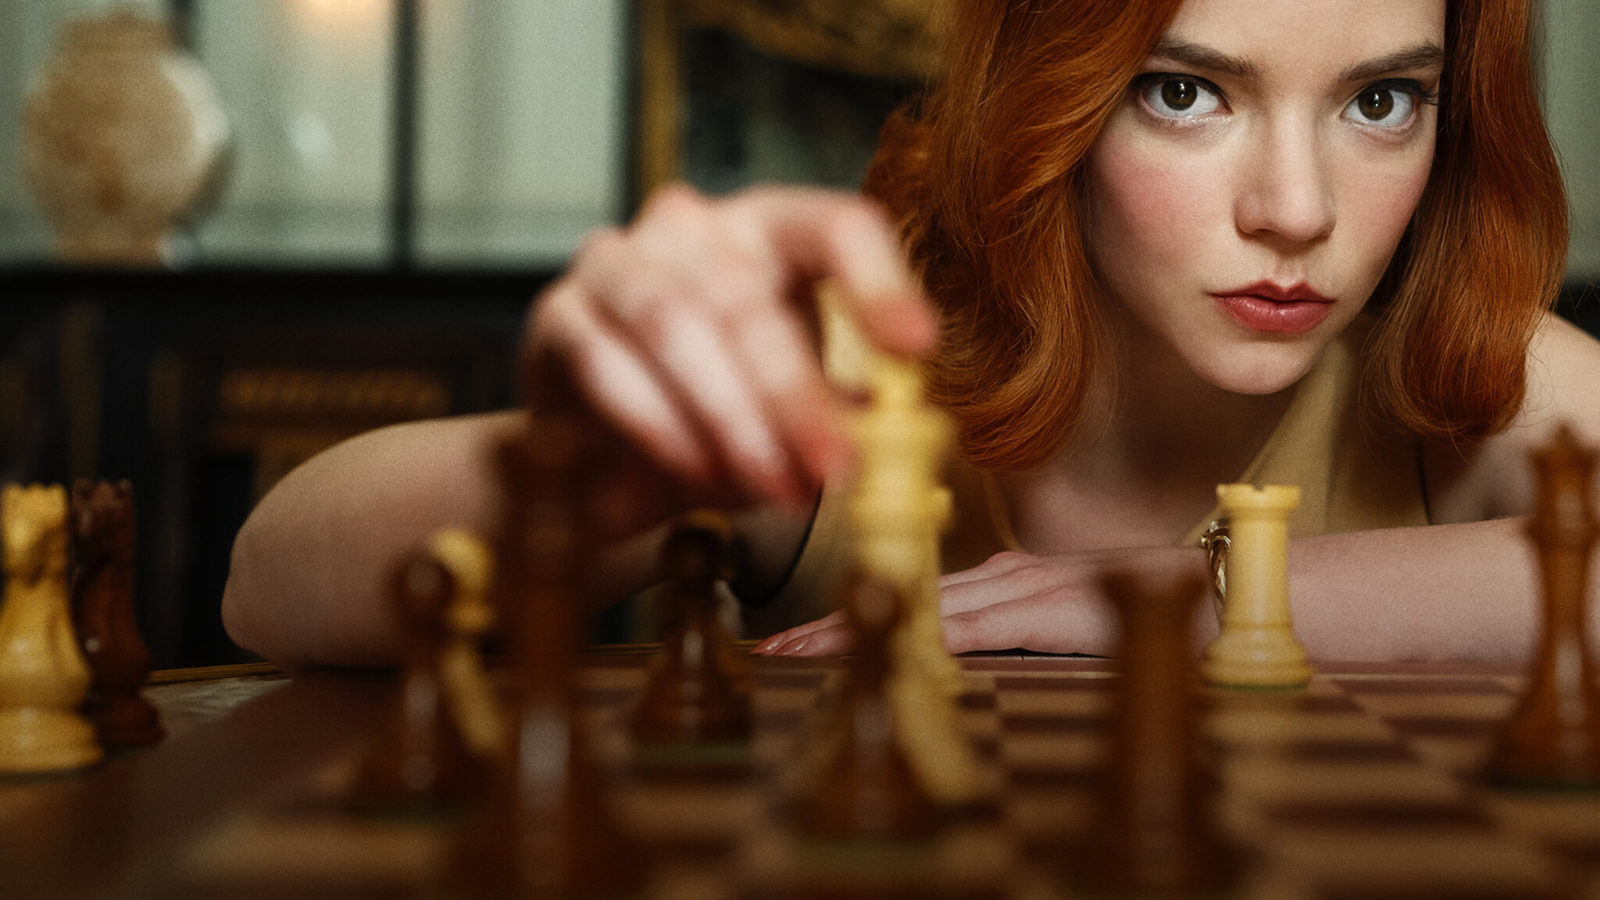 The Queen's Gambit' Season 2: Everything We Know